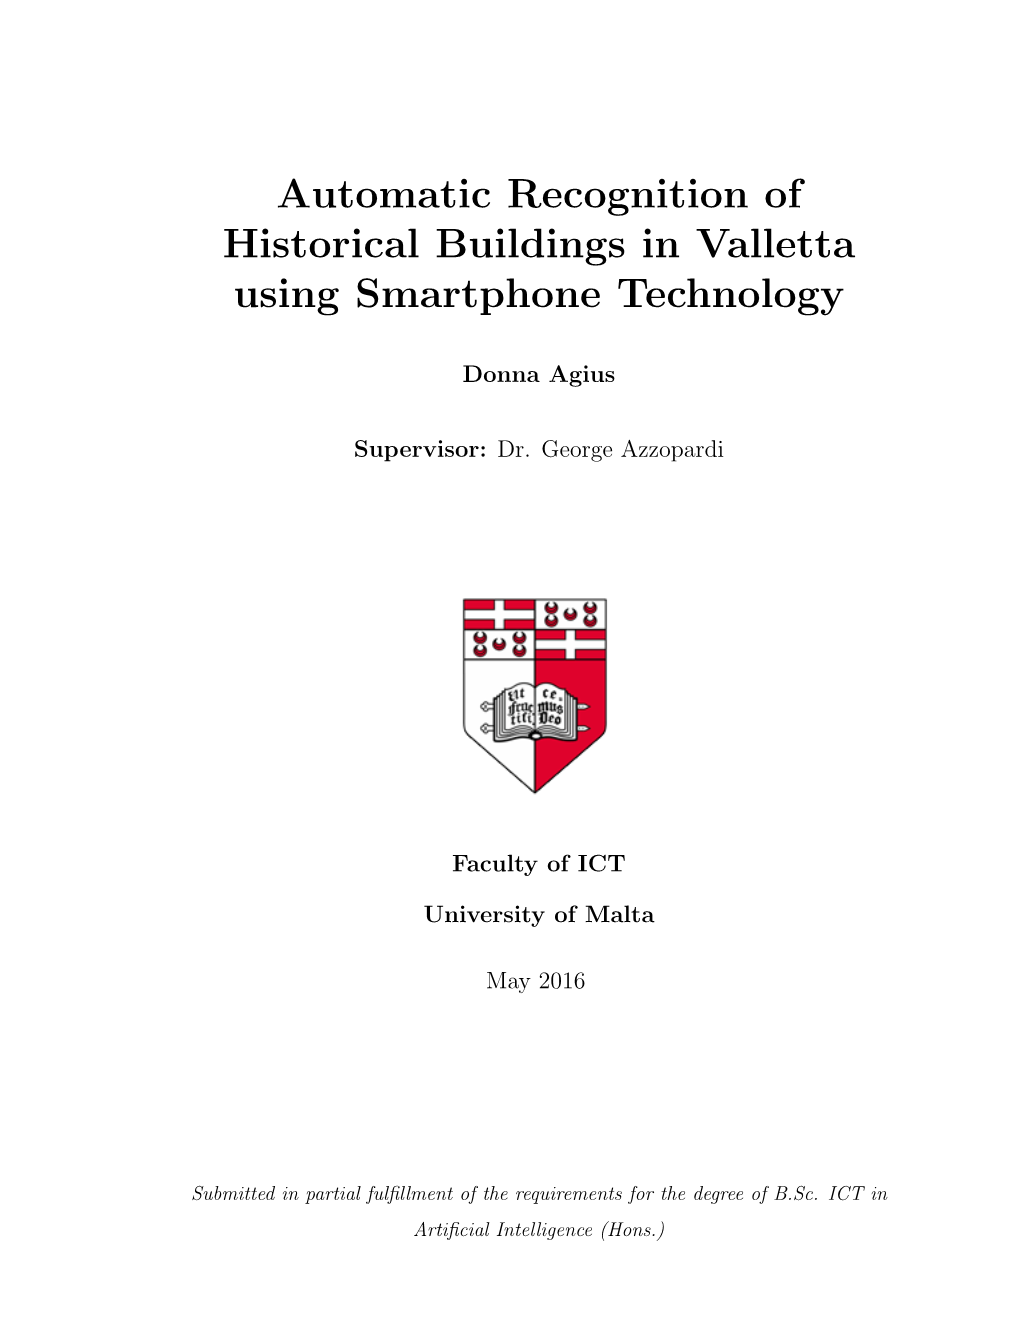 Automatic Recognition of Historical Buildings in Valletta Using Smartphone Technology